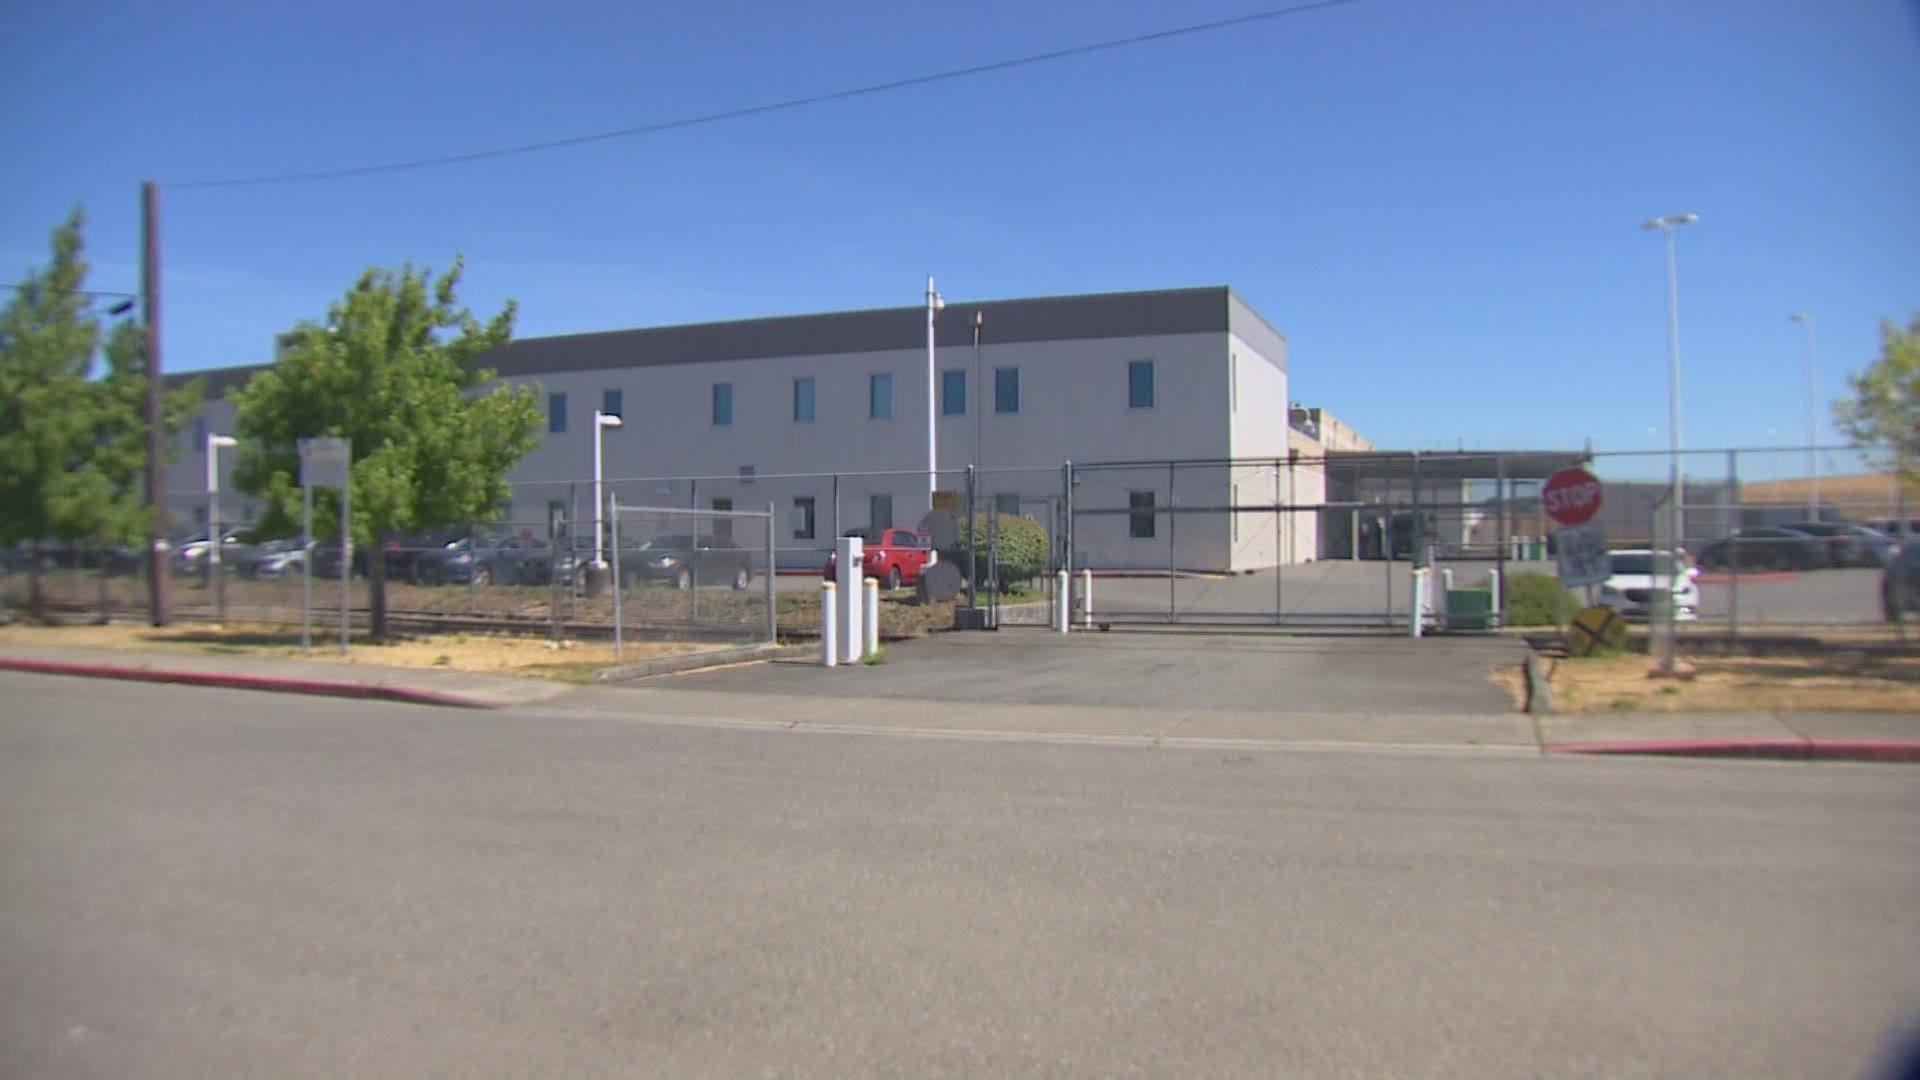 An outbreak of COVID-19 cases that started in June at a facility for detained immigrants in Tacoma, Washington, has gotten worse.